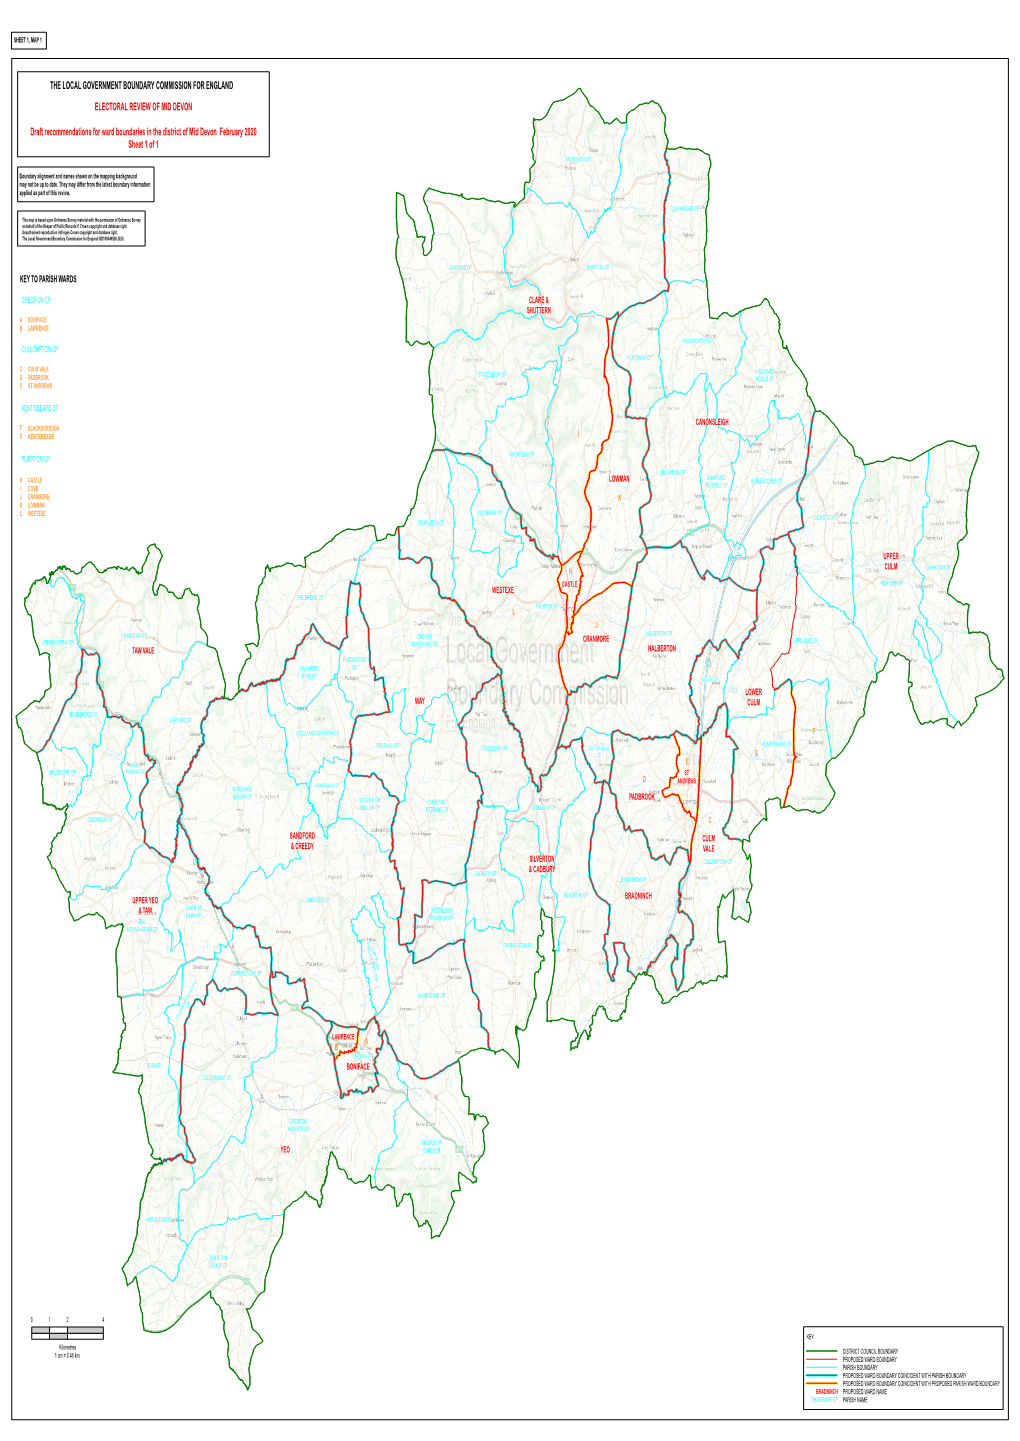 The Local Government Boundary Commission for England Electoral Review of Mid Devon